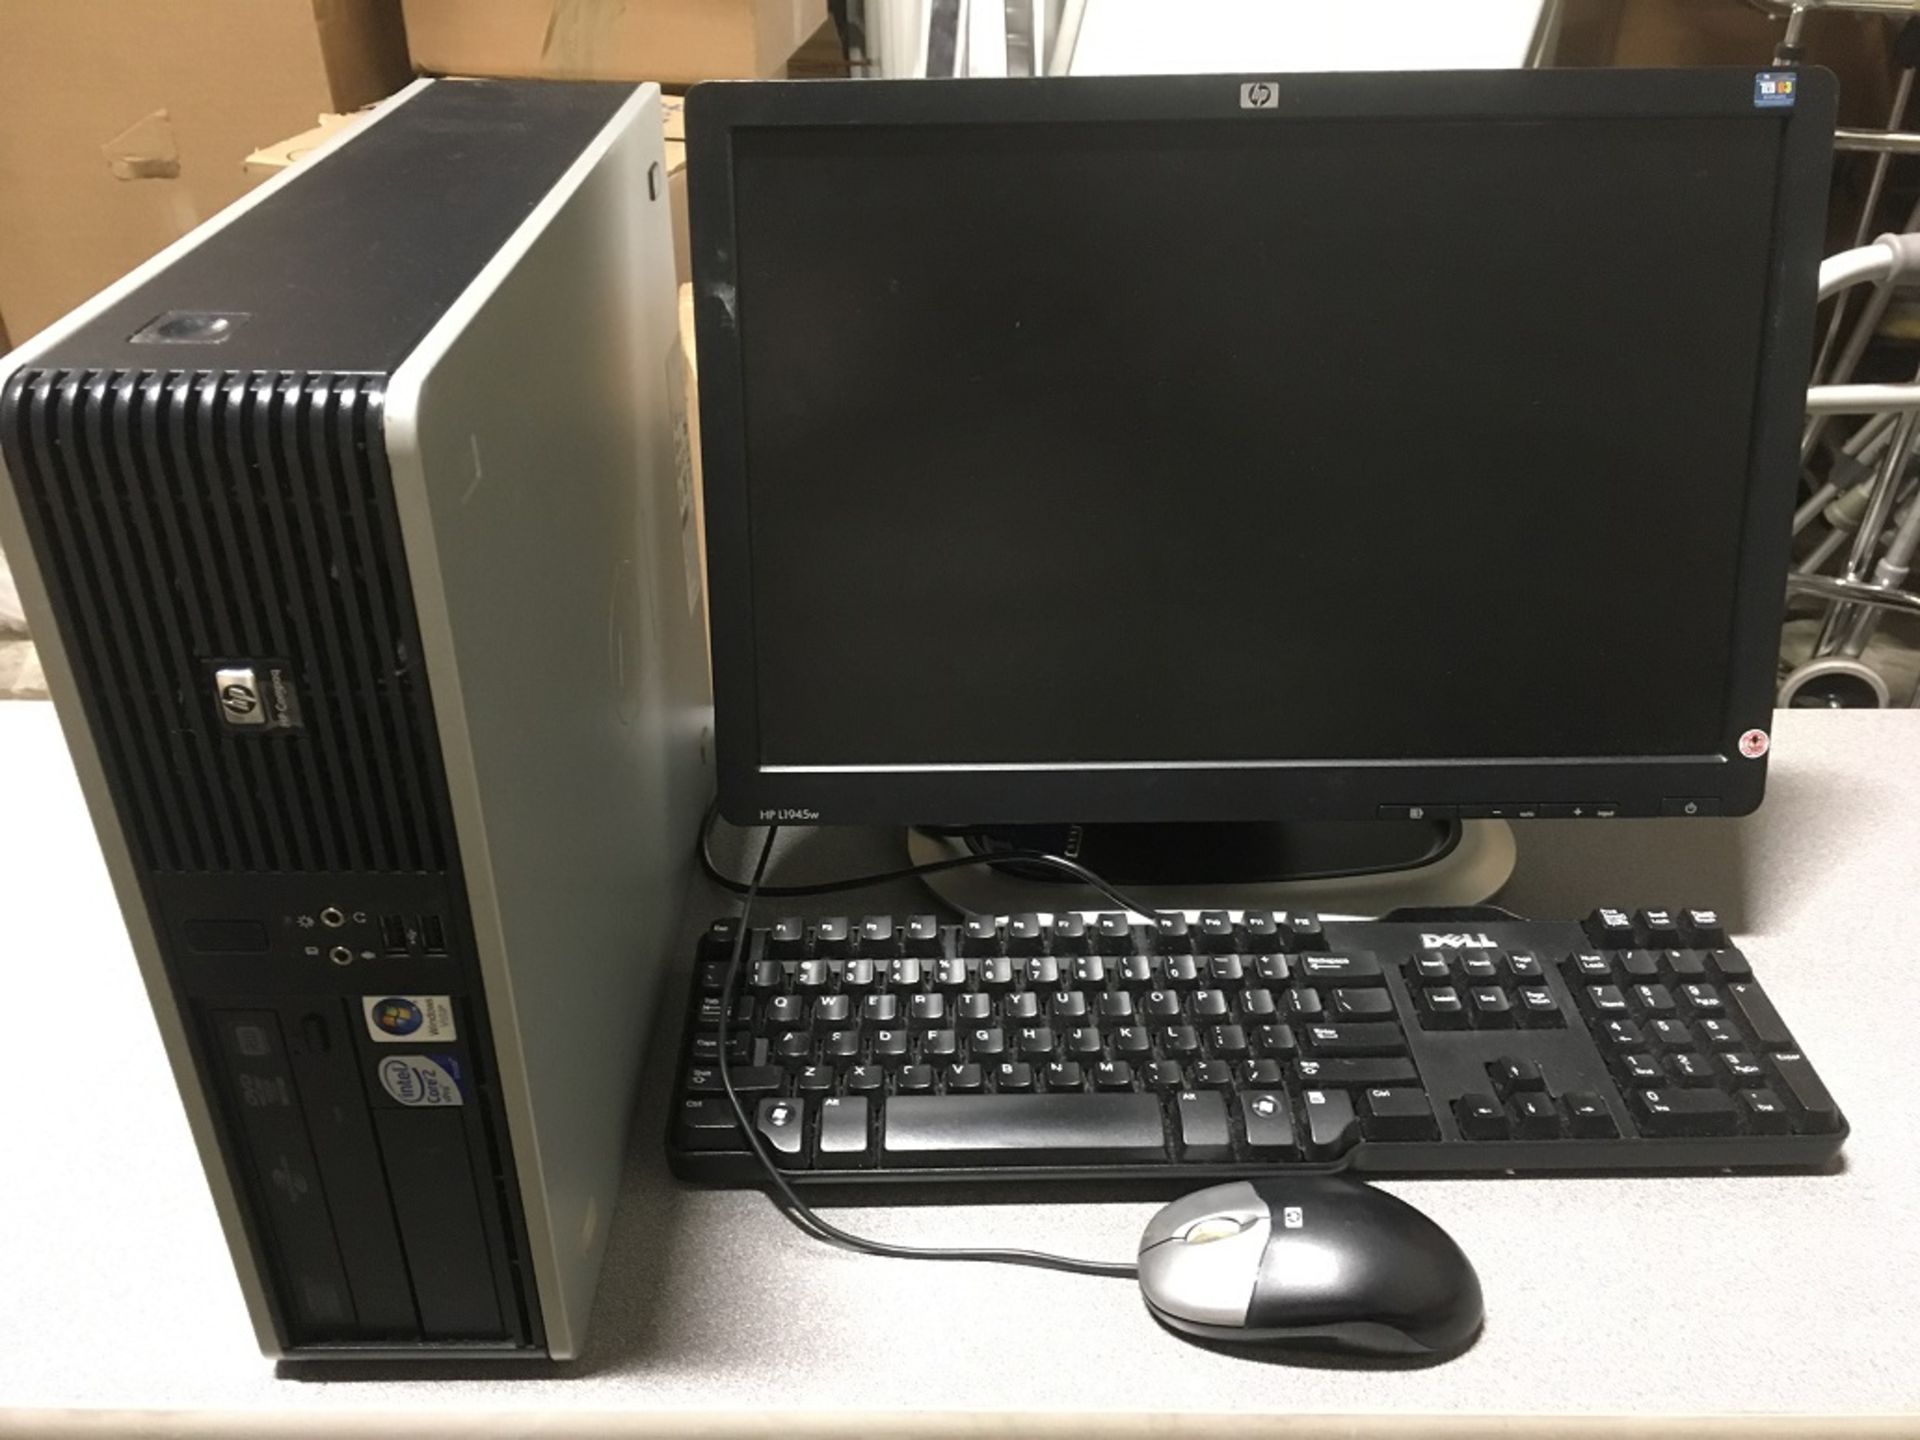 HP Core 2 Duo Desktop PC W/19" LCD Monitor, Keyboard and Mouse